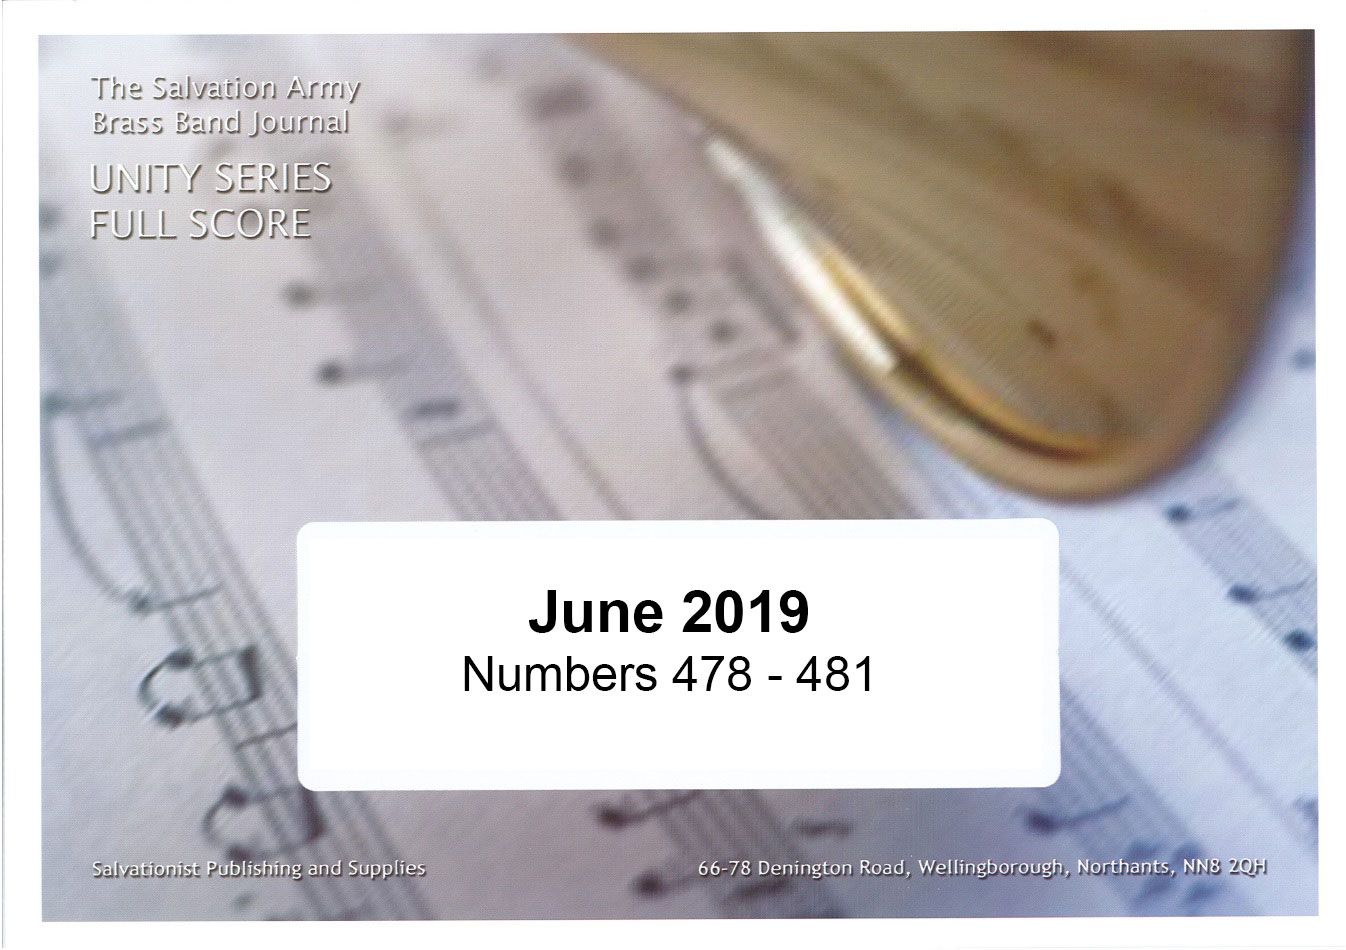 Unity Series Band Journal - Numbers 478 - 481, June 2019